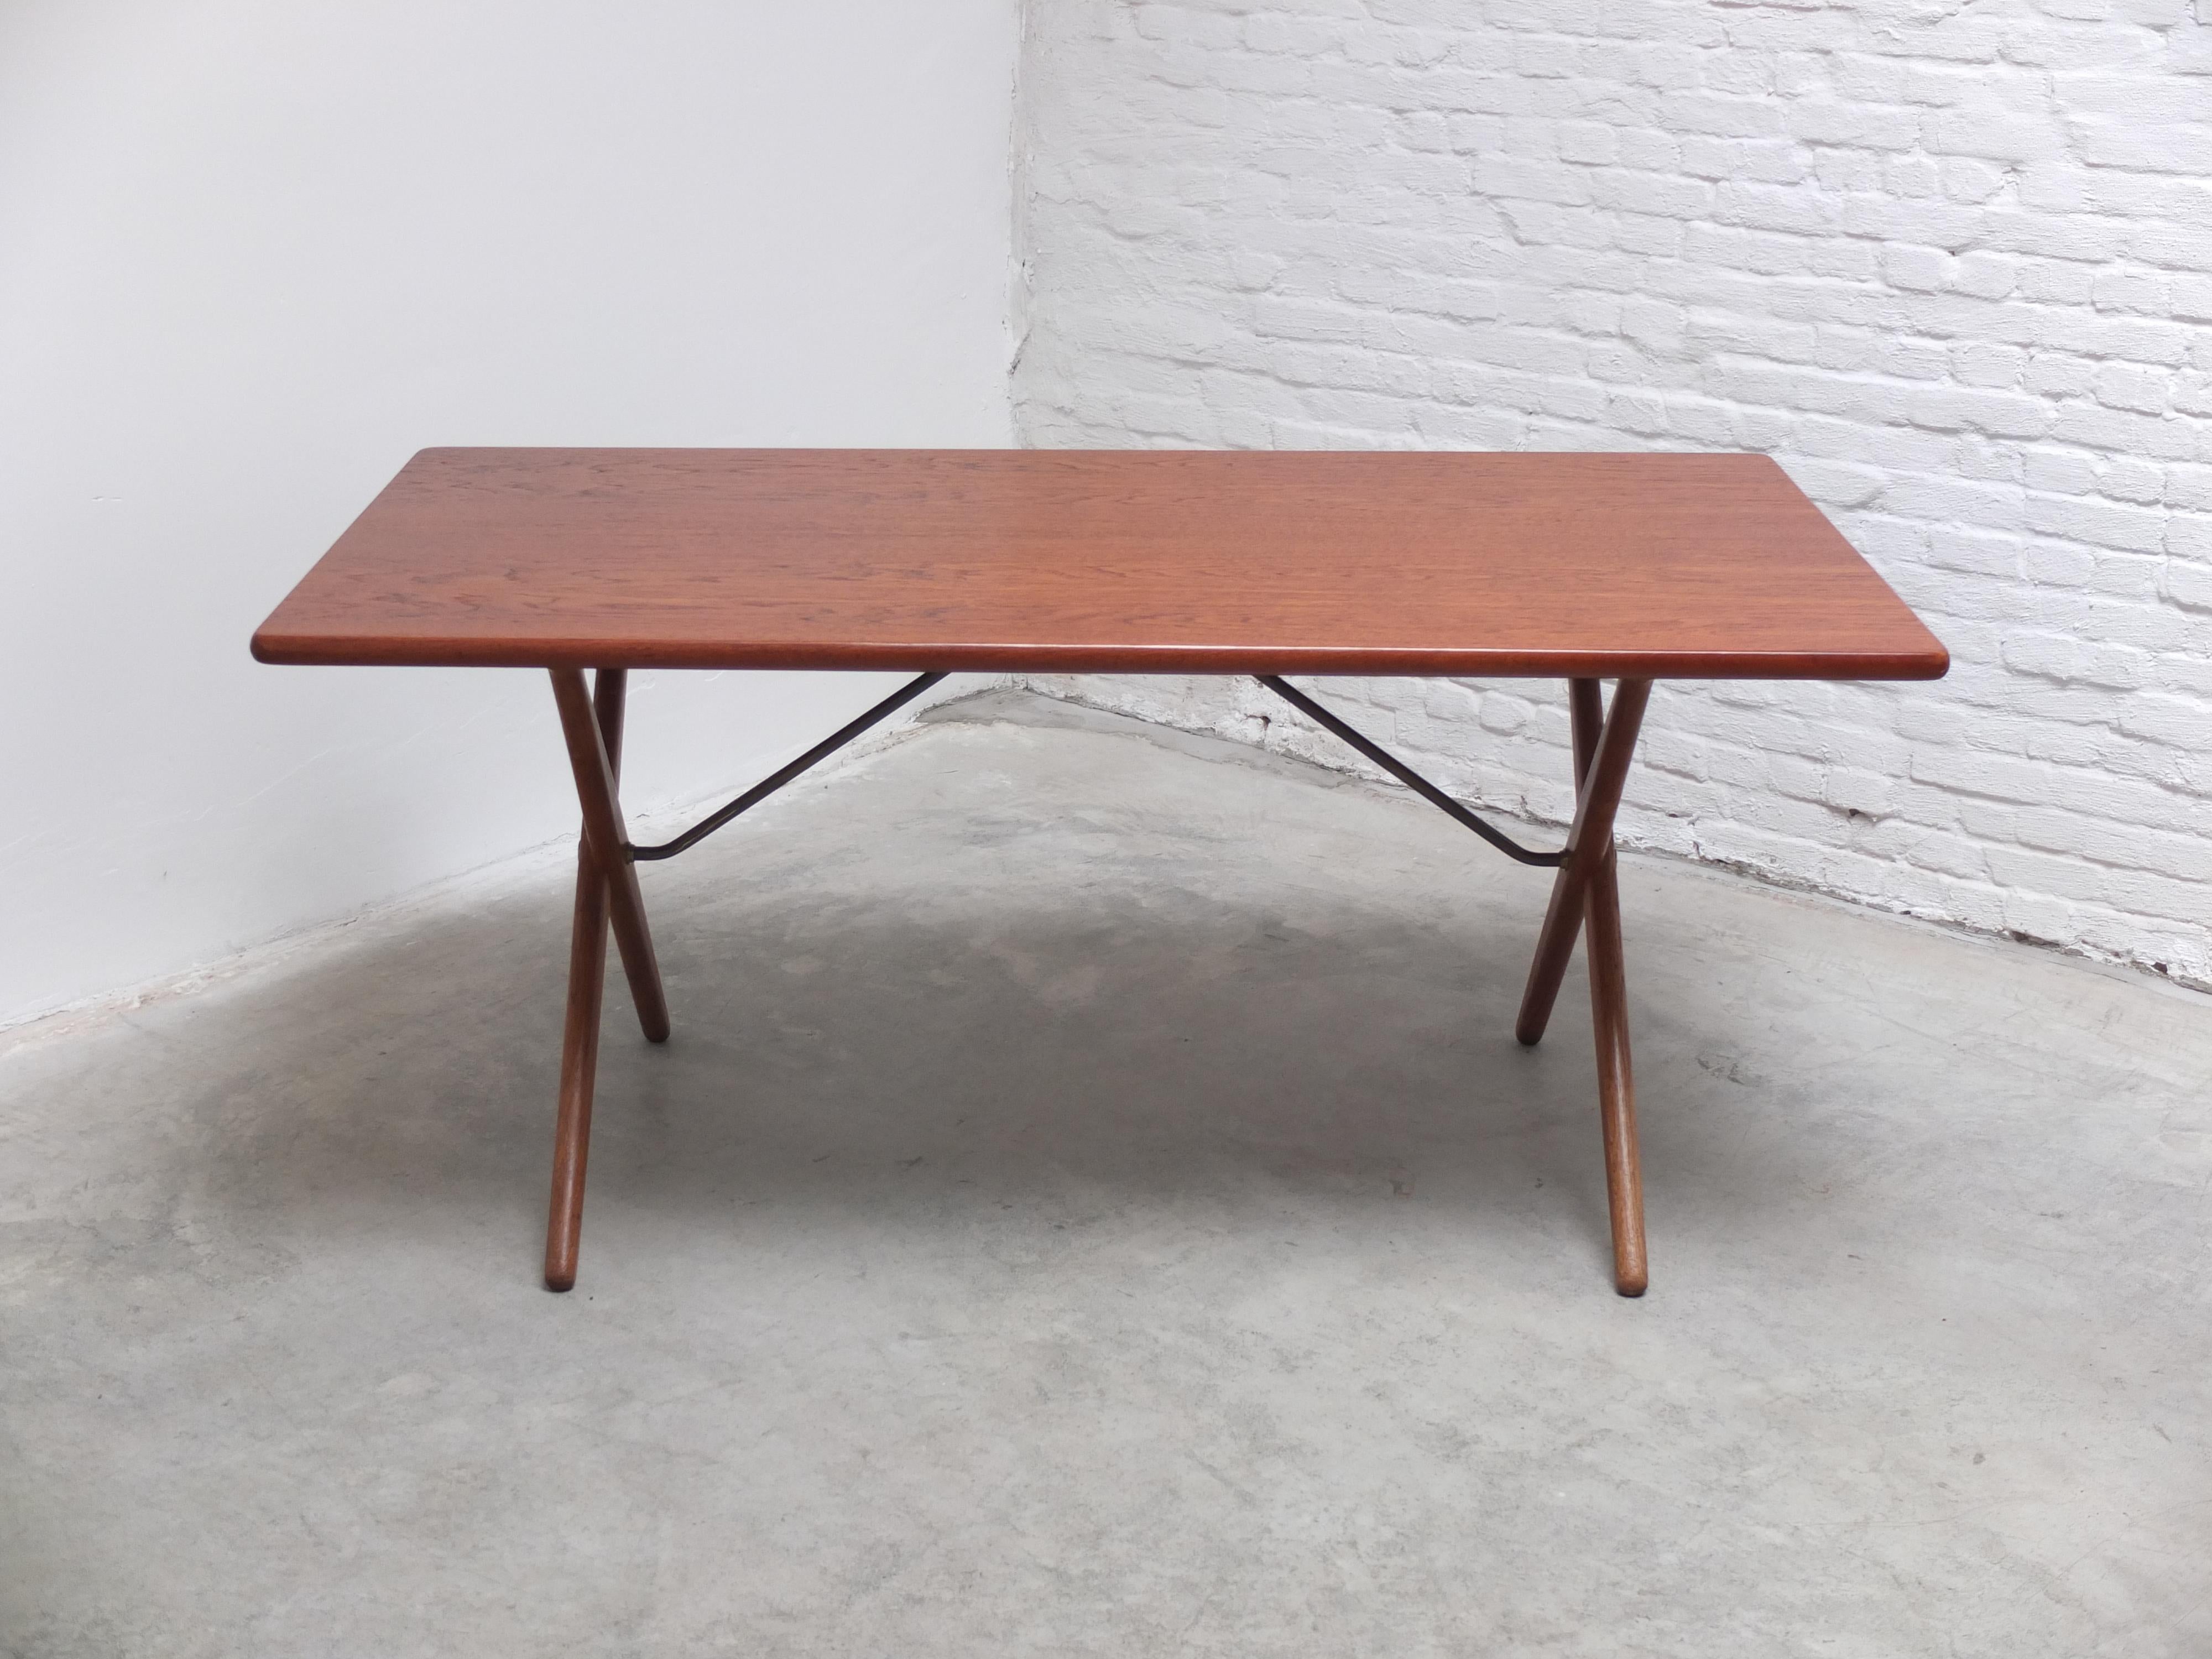 Fantastic ‘AT 303’ dining table designed by Hans Wegner in 1955. This so called ‘cross-leg’ table has a teak top and solid oak legs with a brass support bar and can also be used as a desk. Produced in the 1950s by Andreas Tuck in Denmark (stamped)